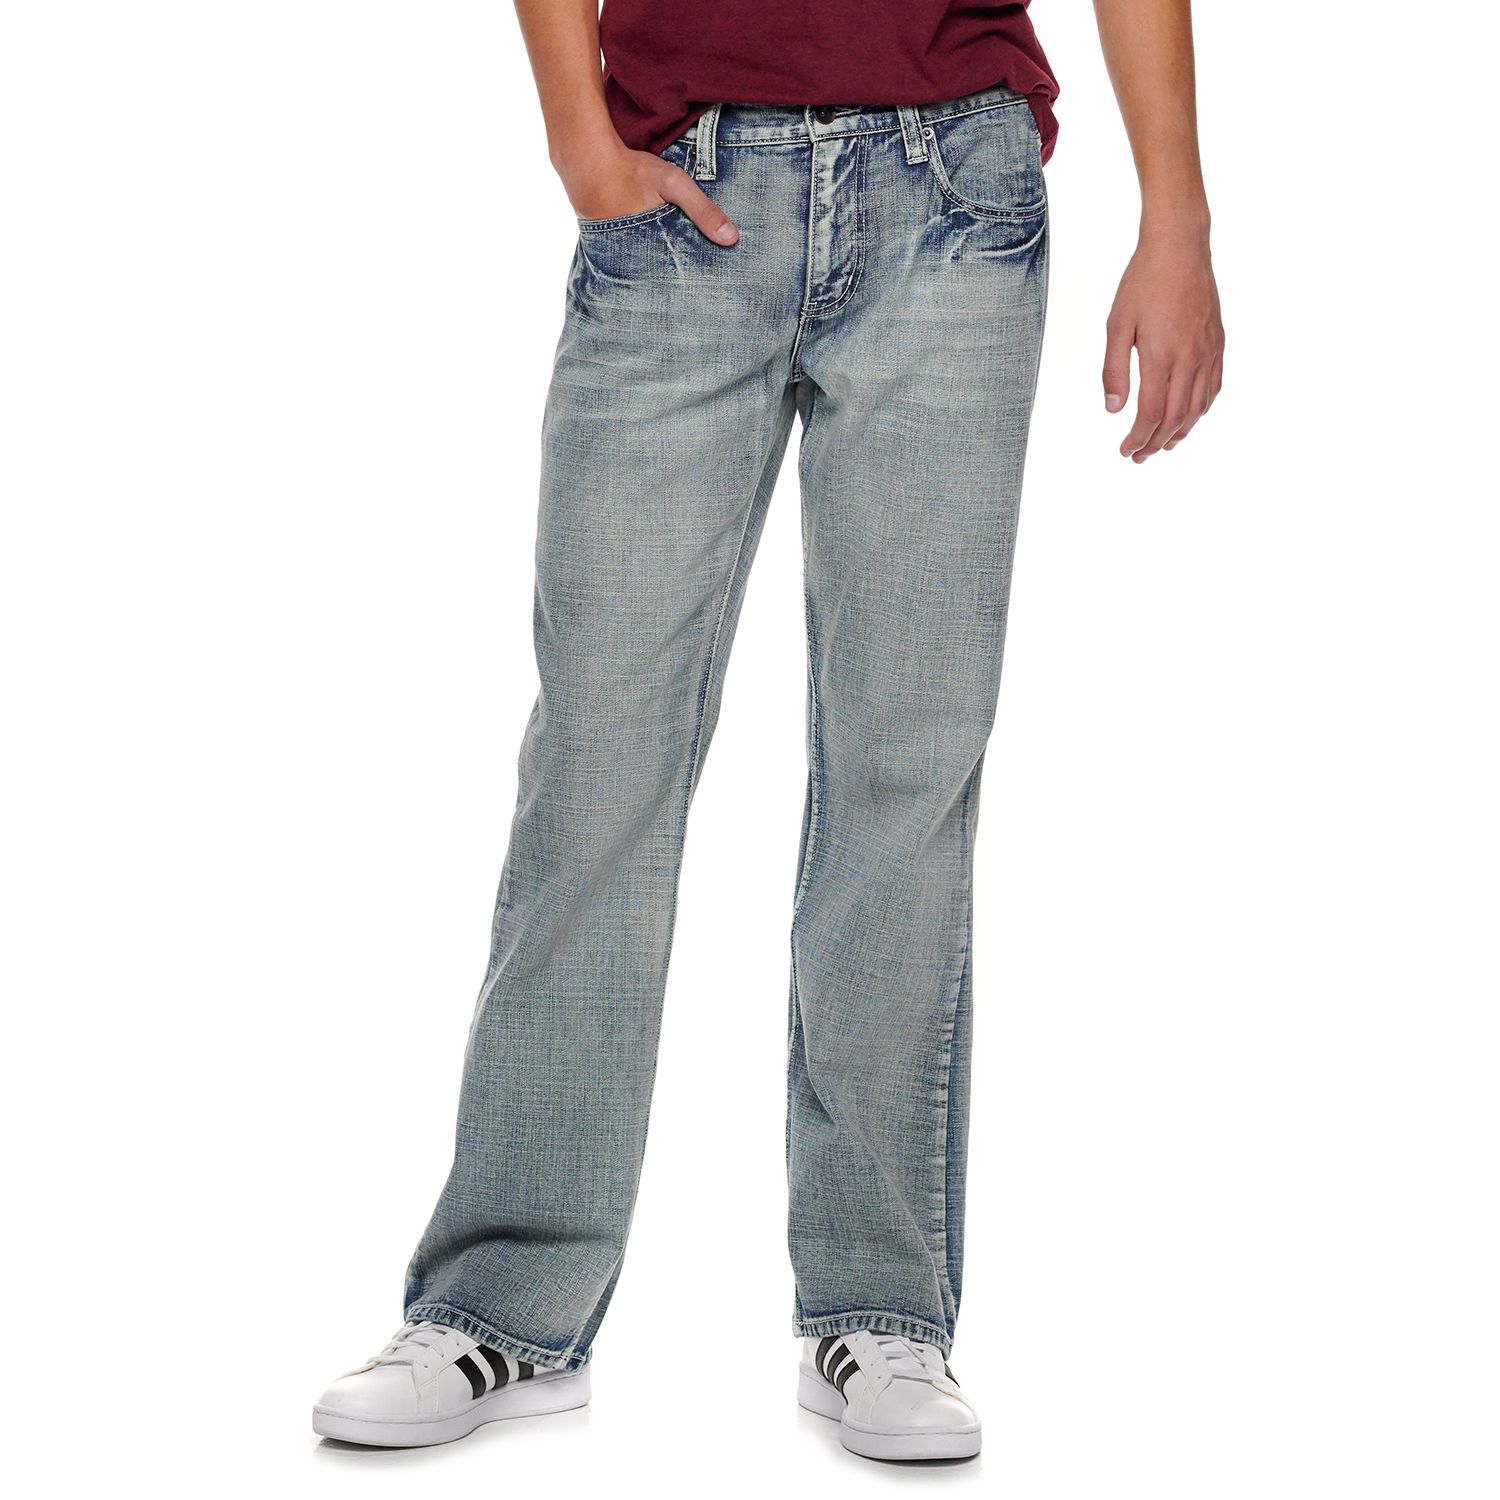 men's relaxed fit bootcut jeans